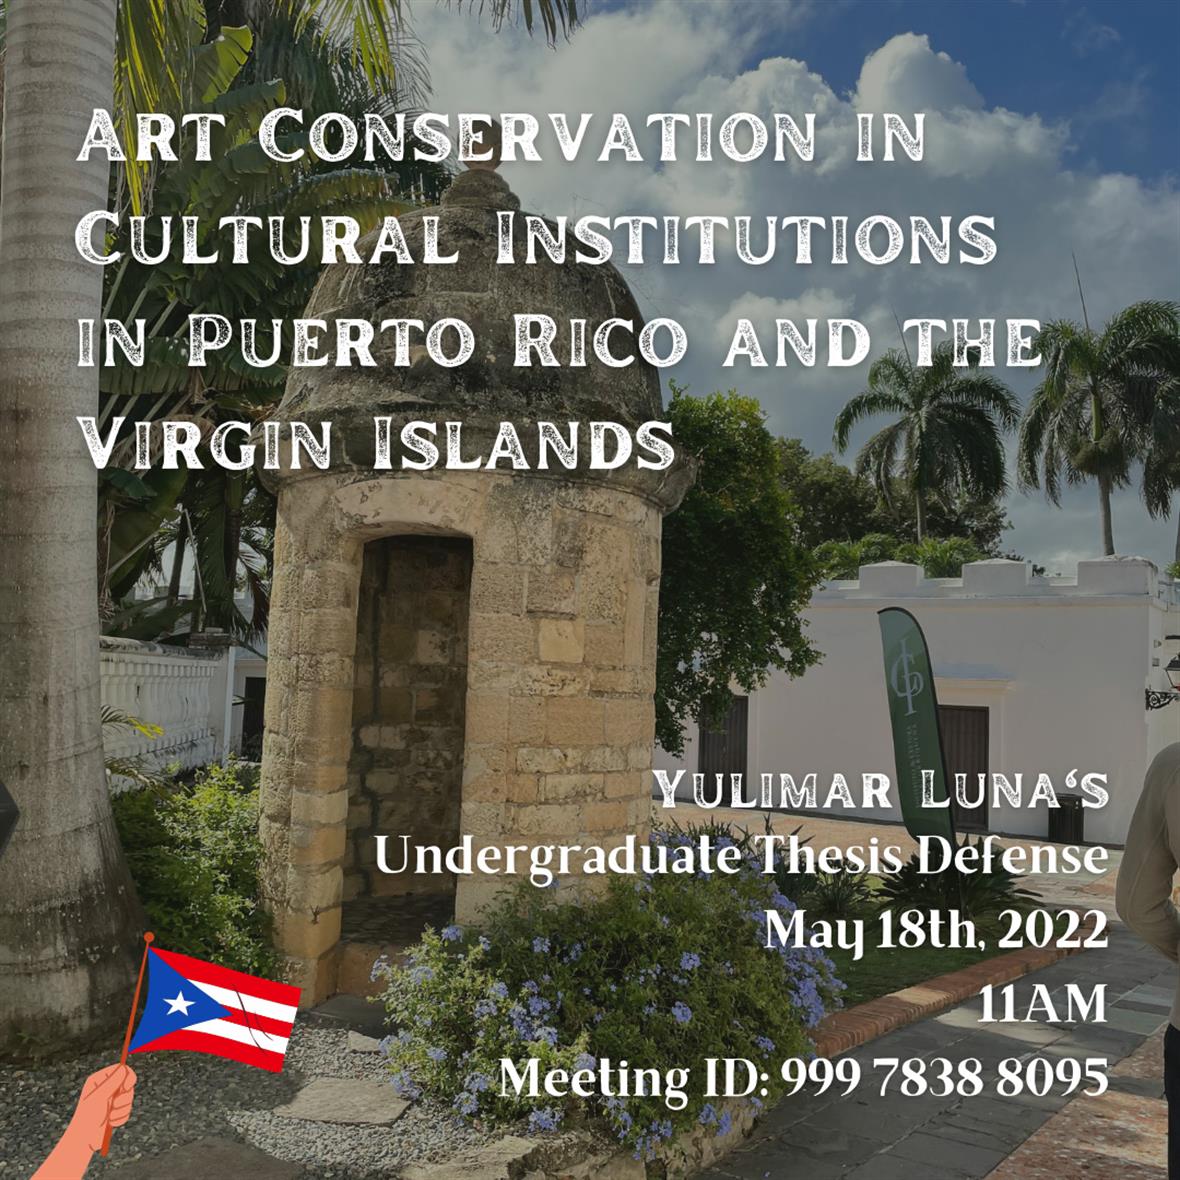 The student's thesis flyer includes images of historic structures and the Puerto Rican flag.